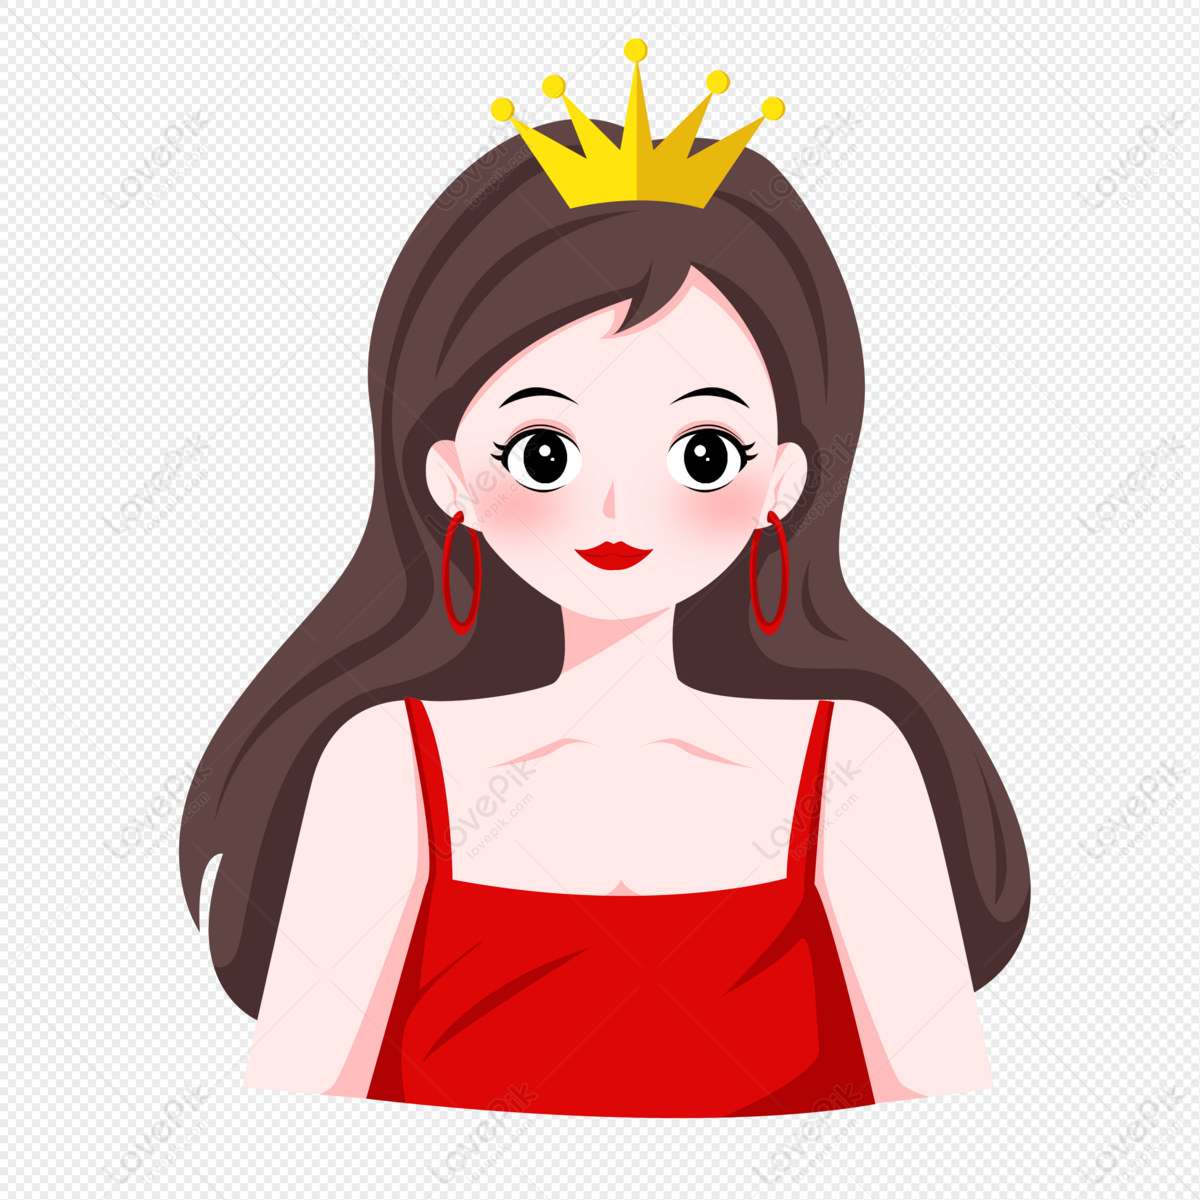 Profile Photo PNG Transparent, Cute Girl Profile Photo, Cartoon, Screen, Ad  PNG Image For Free Download